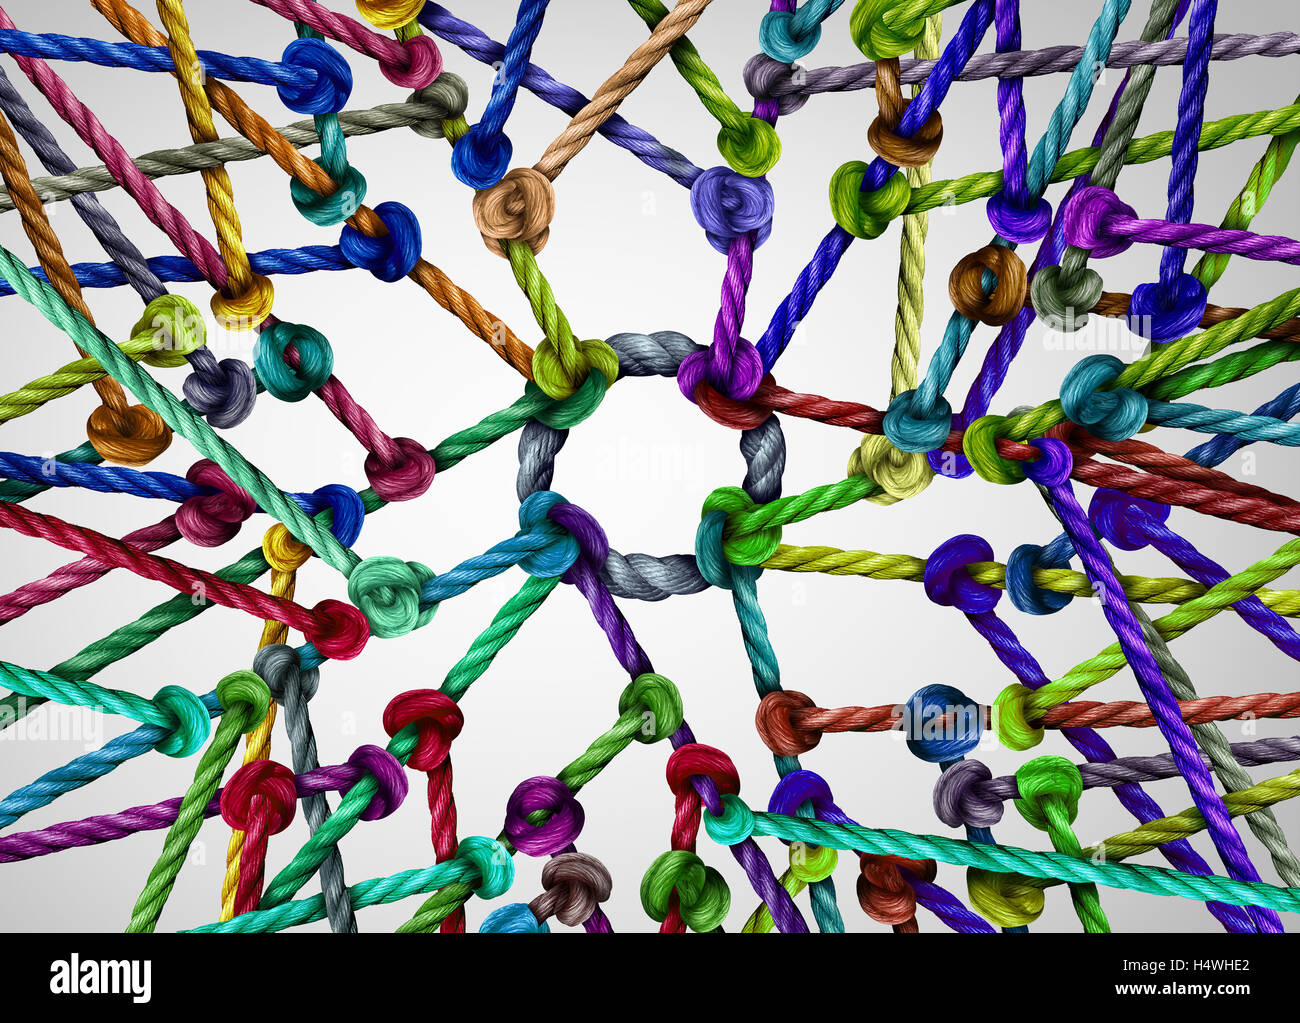 Network center nucleus as a vast diverse group of ropes tied and connected to a centralized circle as a technology and global internet metaphor for being linked together. Stock Photo